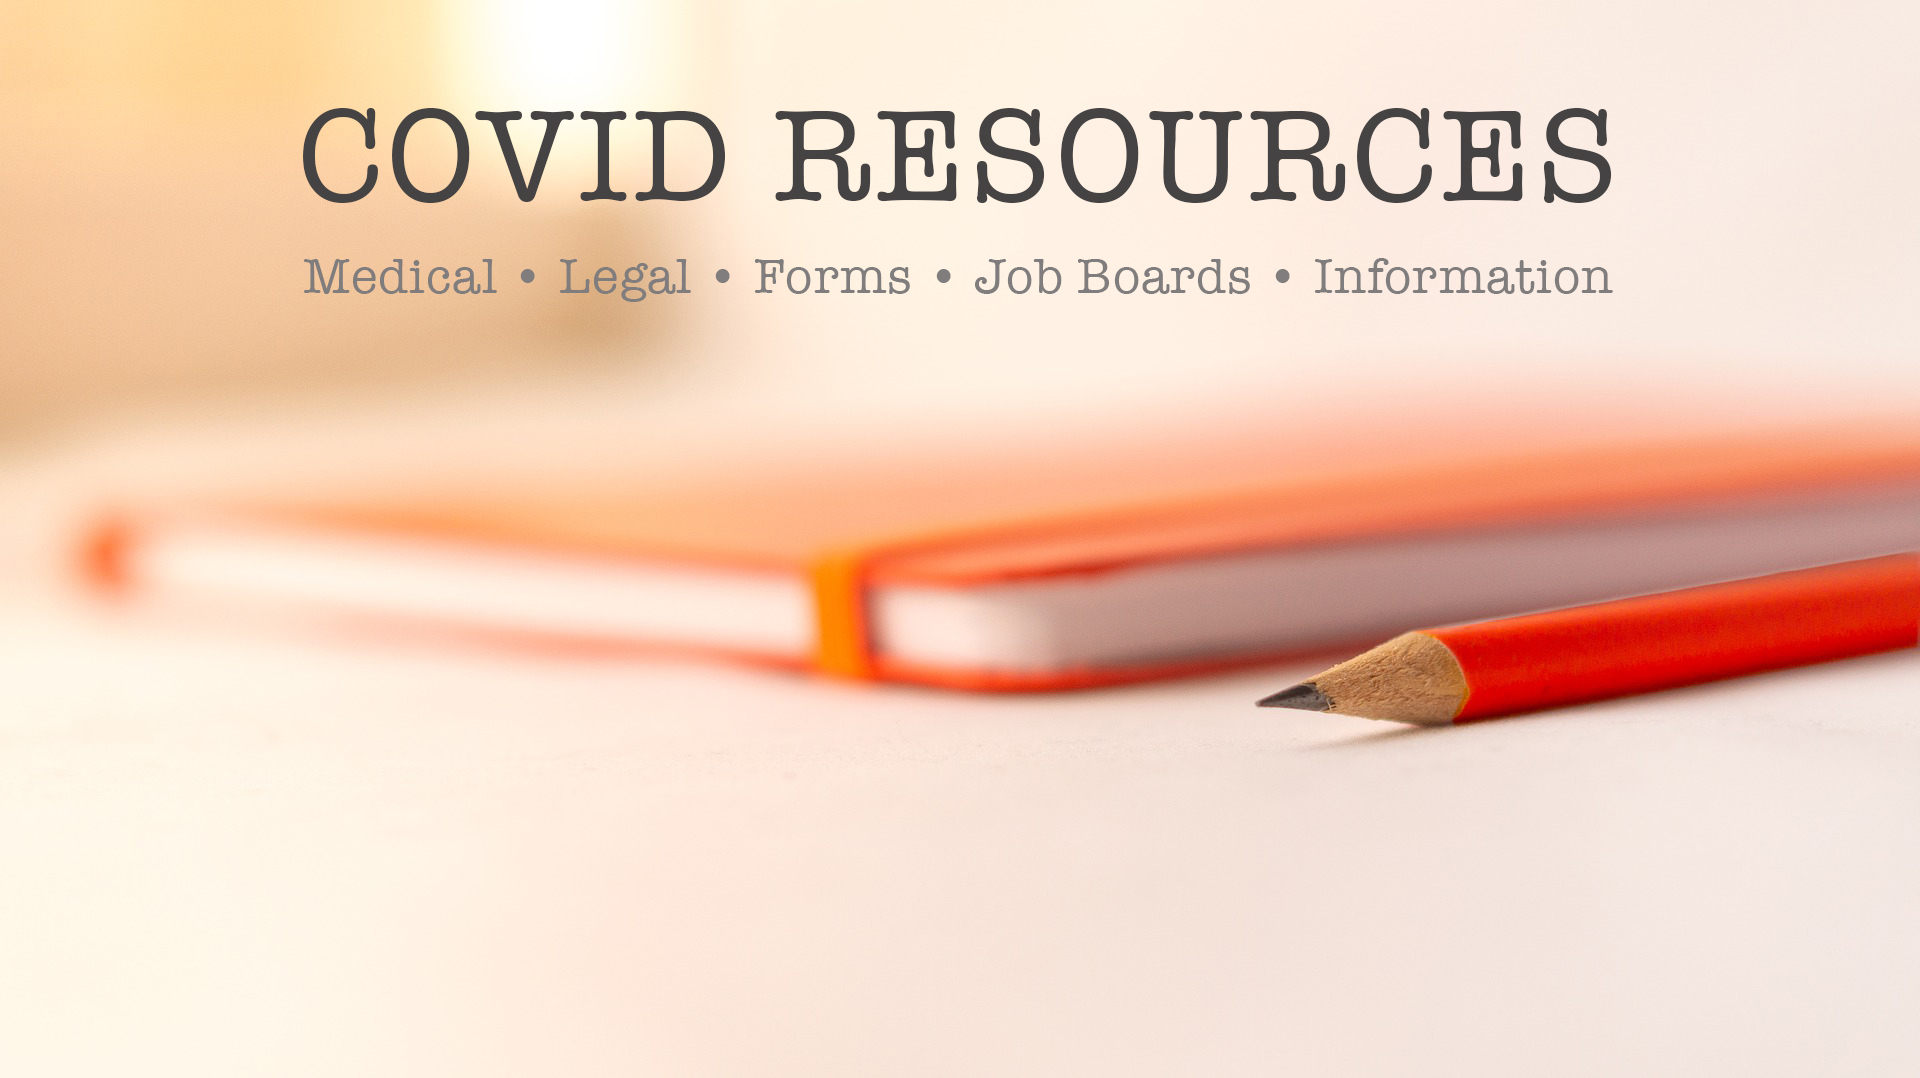  Covid-19 Resources: Medical, Legal, Forms, Jobs & Other Critical Information